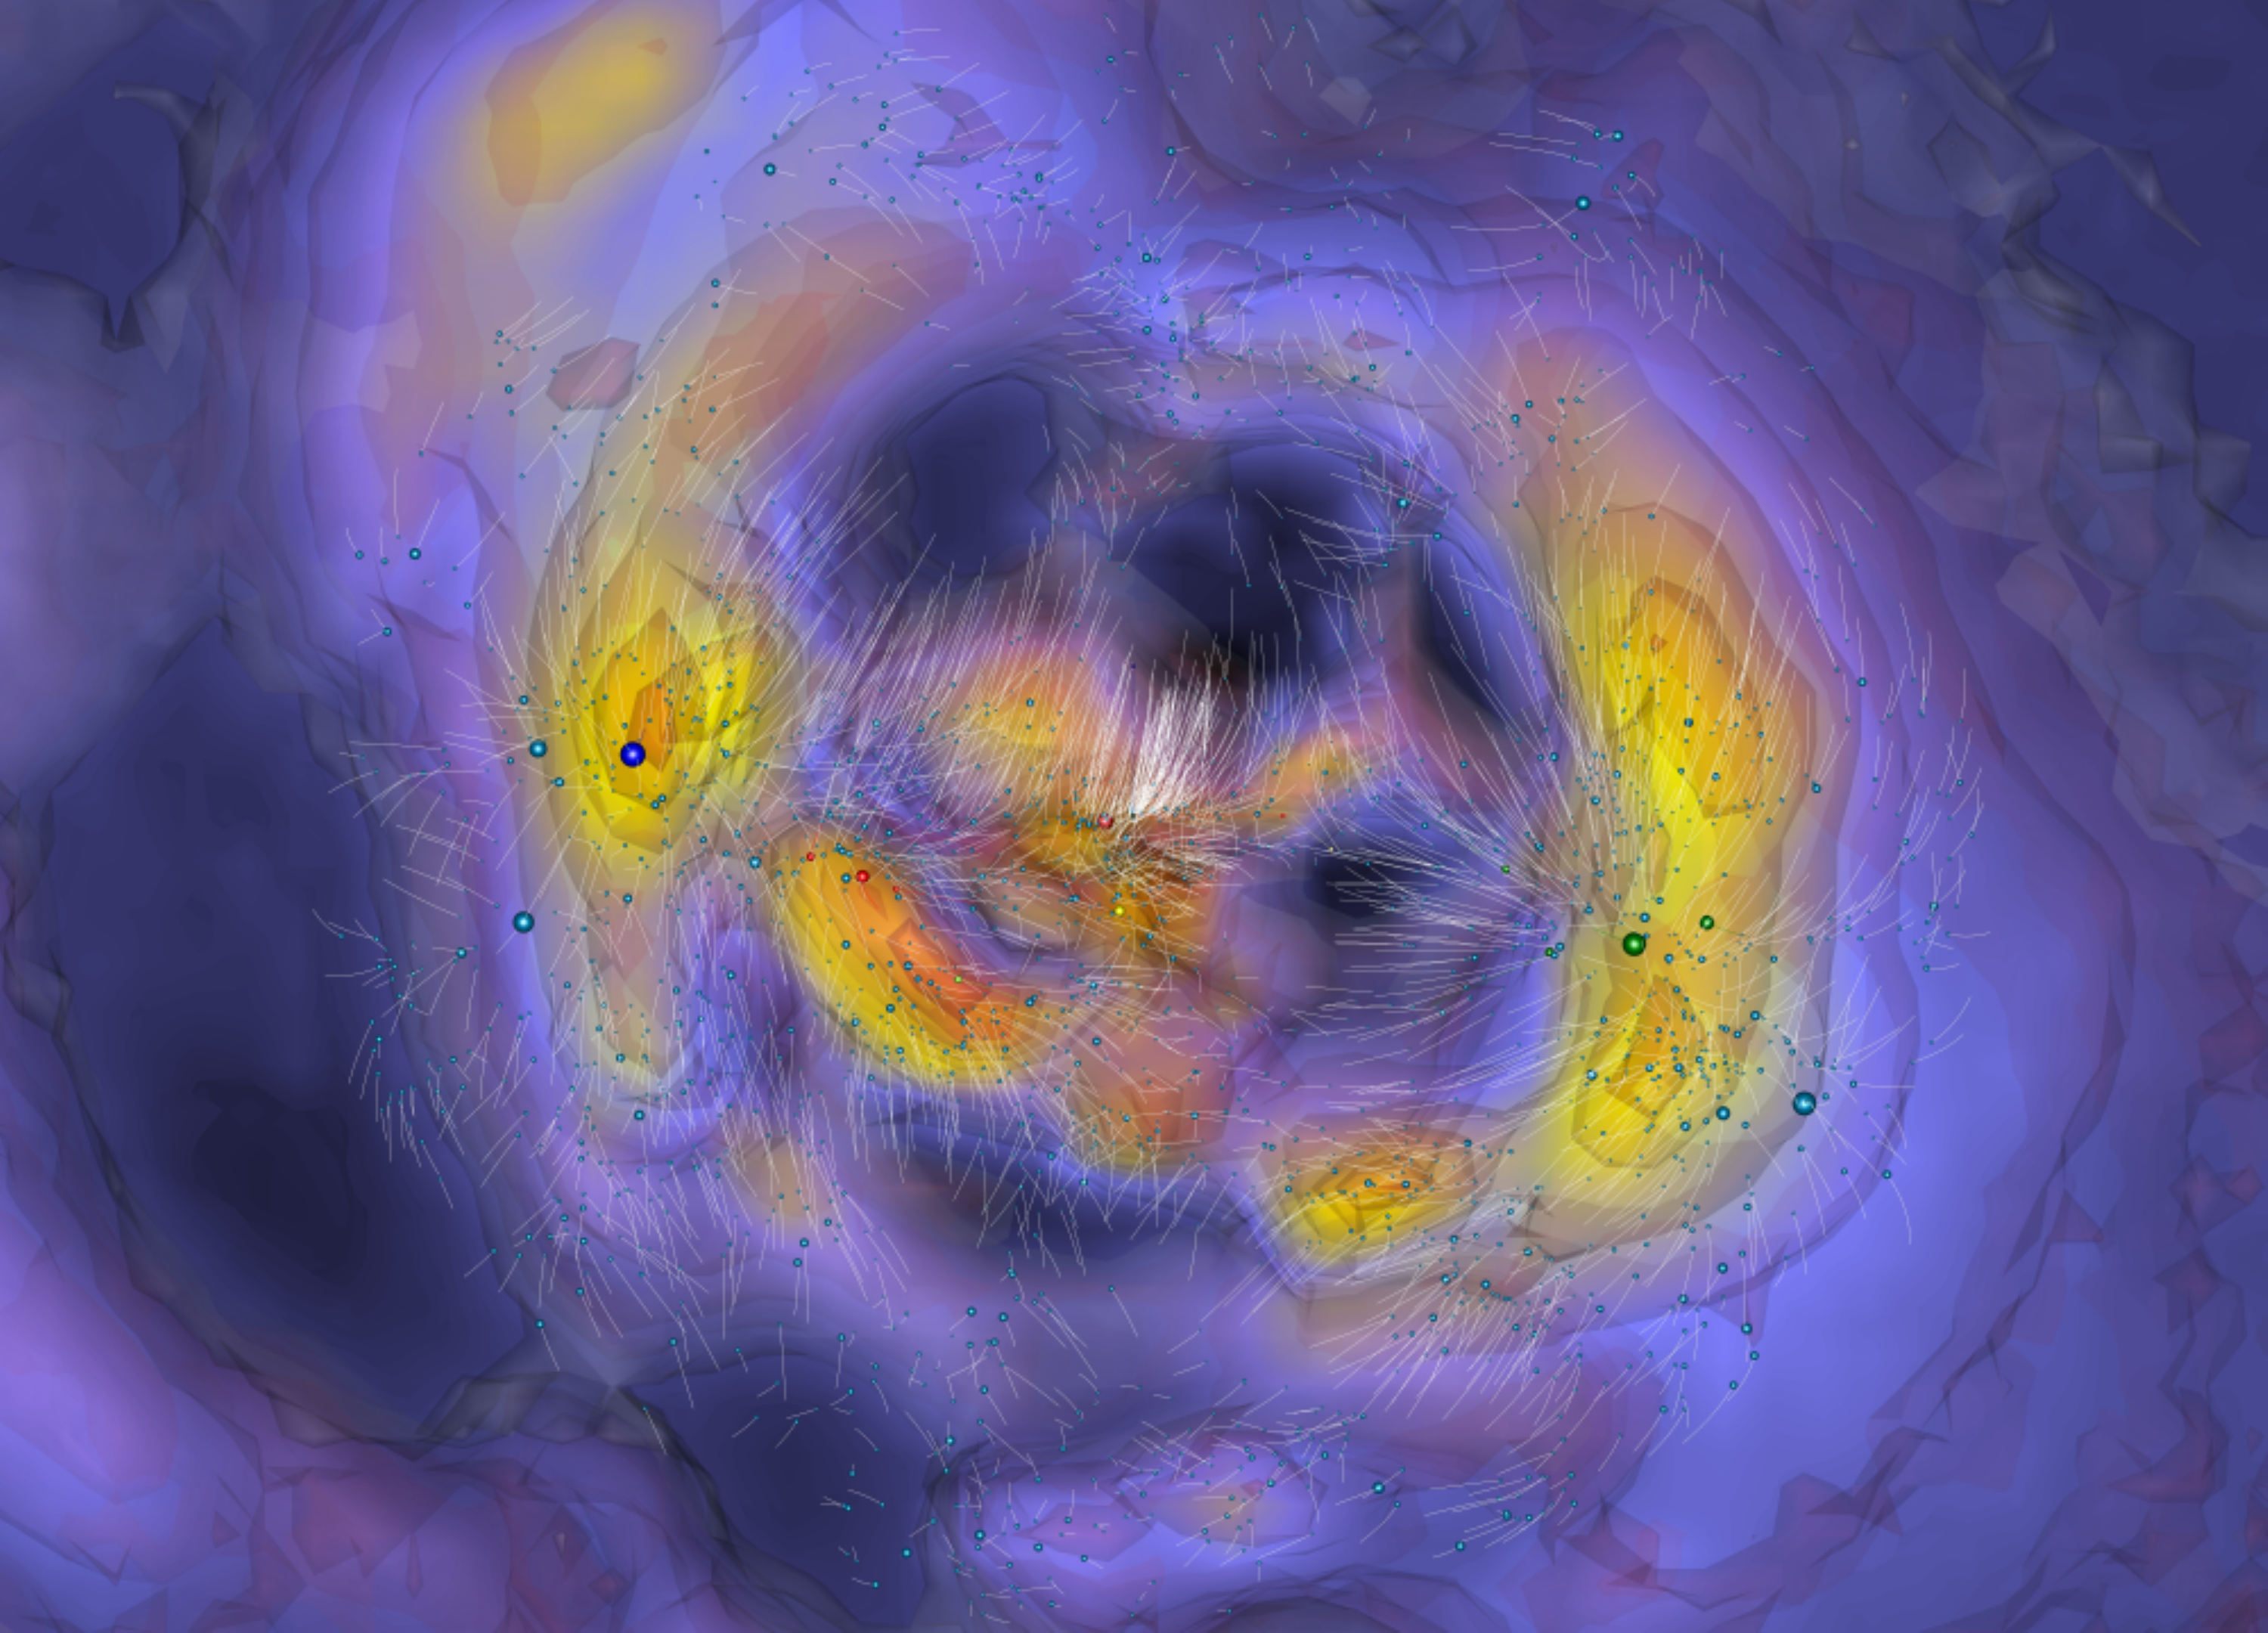 A slice of the local universe showing the orbits that galaxies have followed in white and contours of regions of high density in shades of yellow-orange. The Milky Way is near the center where there is a display of many white orbits. The Great Attractor core of the Laniakea Supercluster is to the left, about 250 million light-years from the Milky Way, and the Perseus-Pisces concentration of galaxies is at a similar distance from us to the right. Image courtesy of Ed Shaya. Click image to download hi-res version.